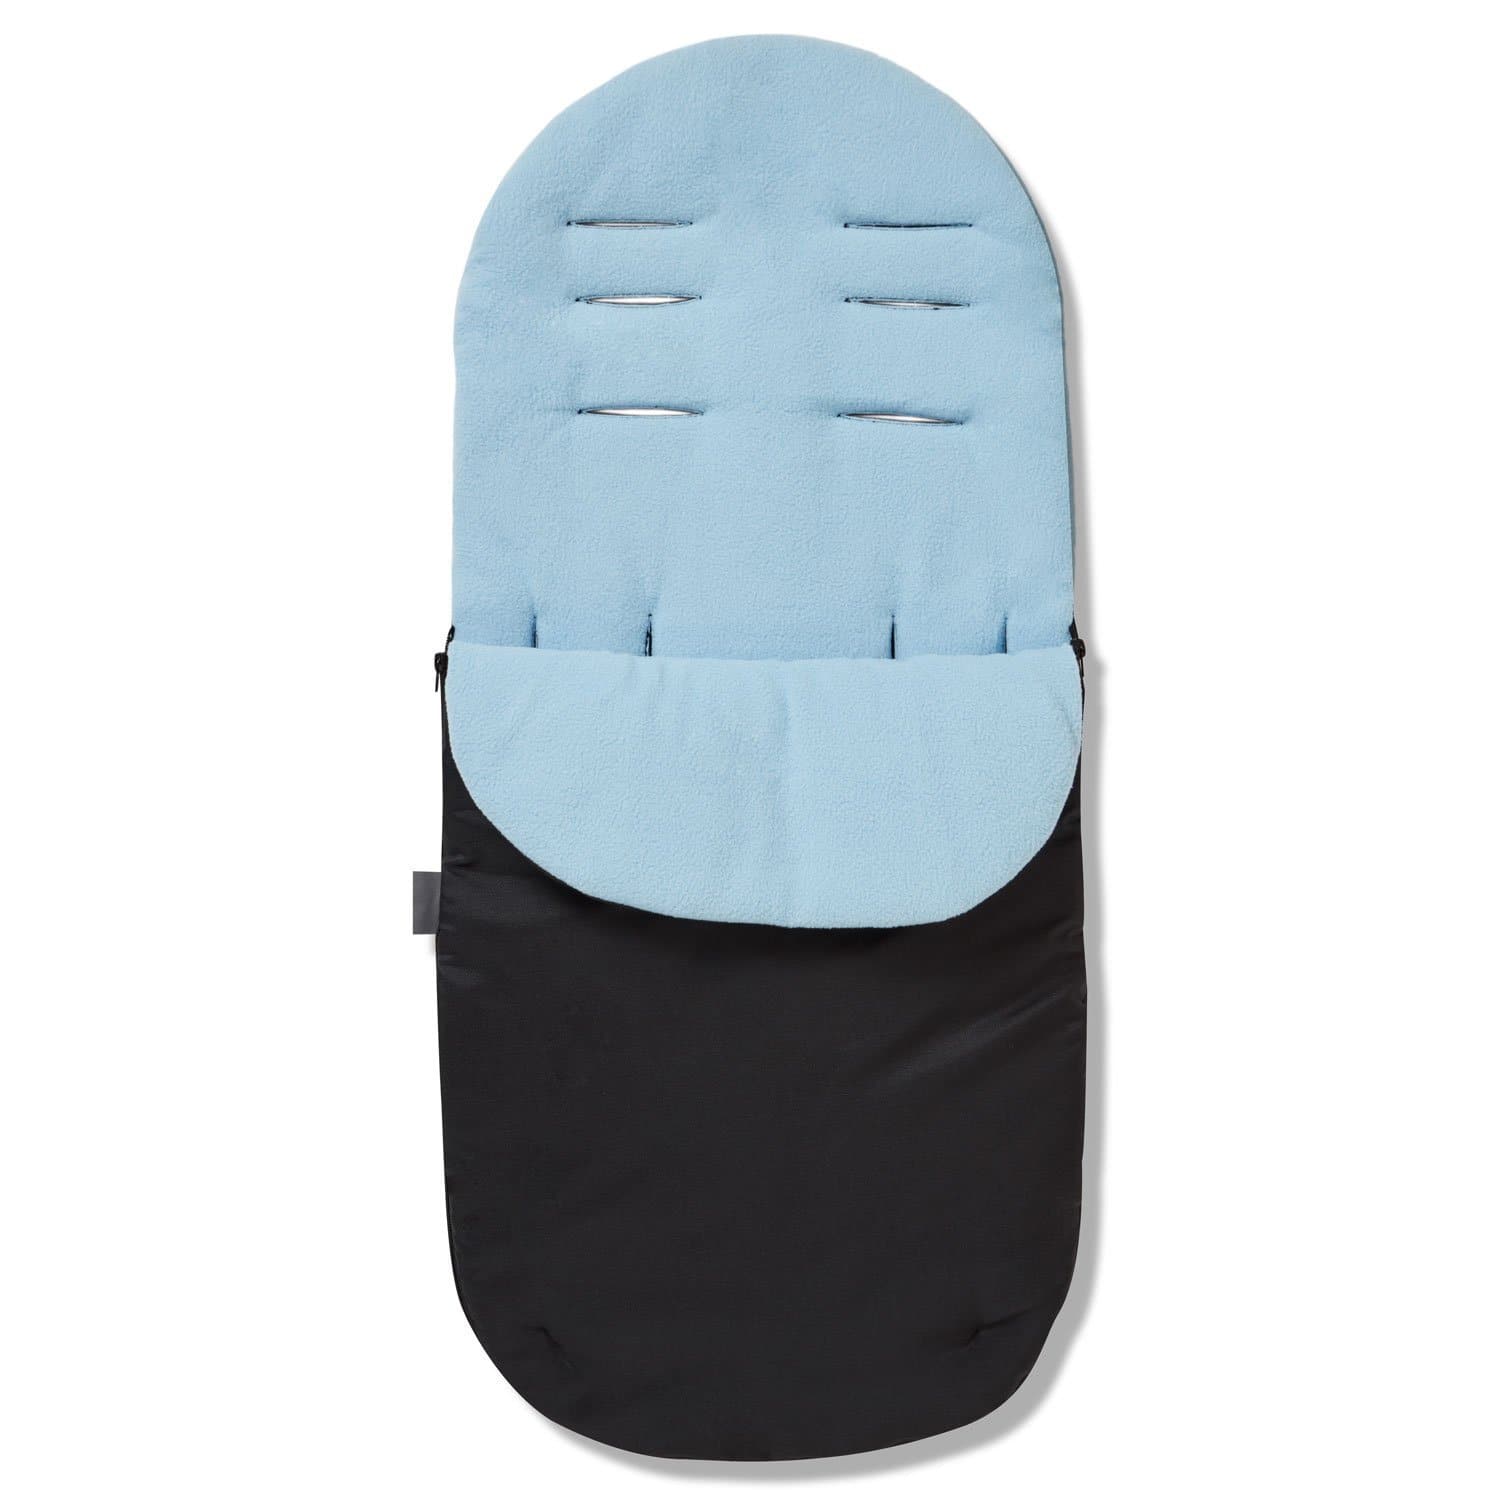 Footmuff / Cosy Toes Compatible with Teutonia - Light Blue / Fits All Models | For Your Little One